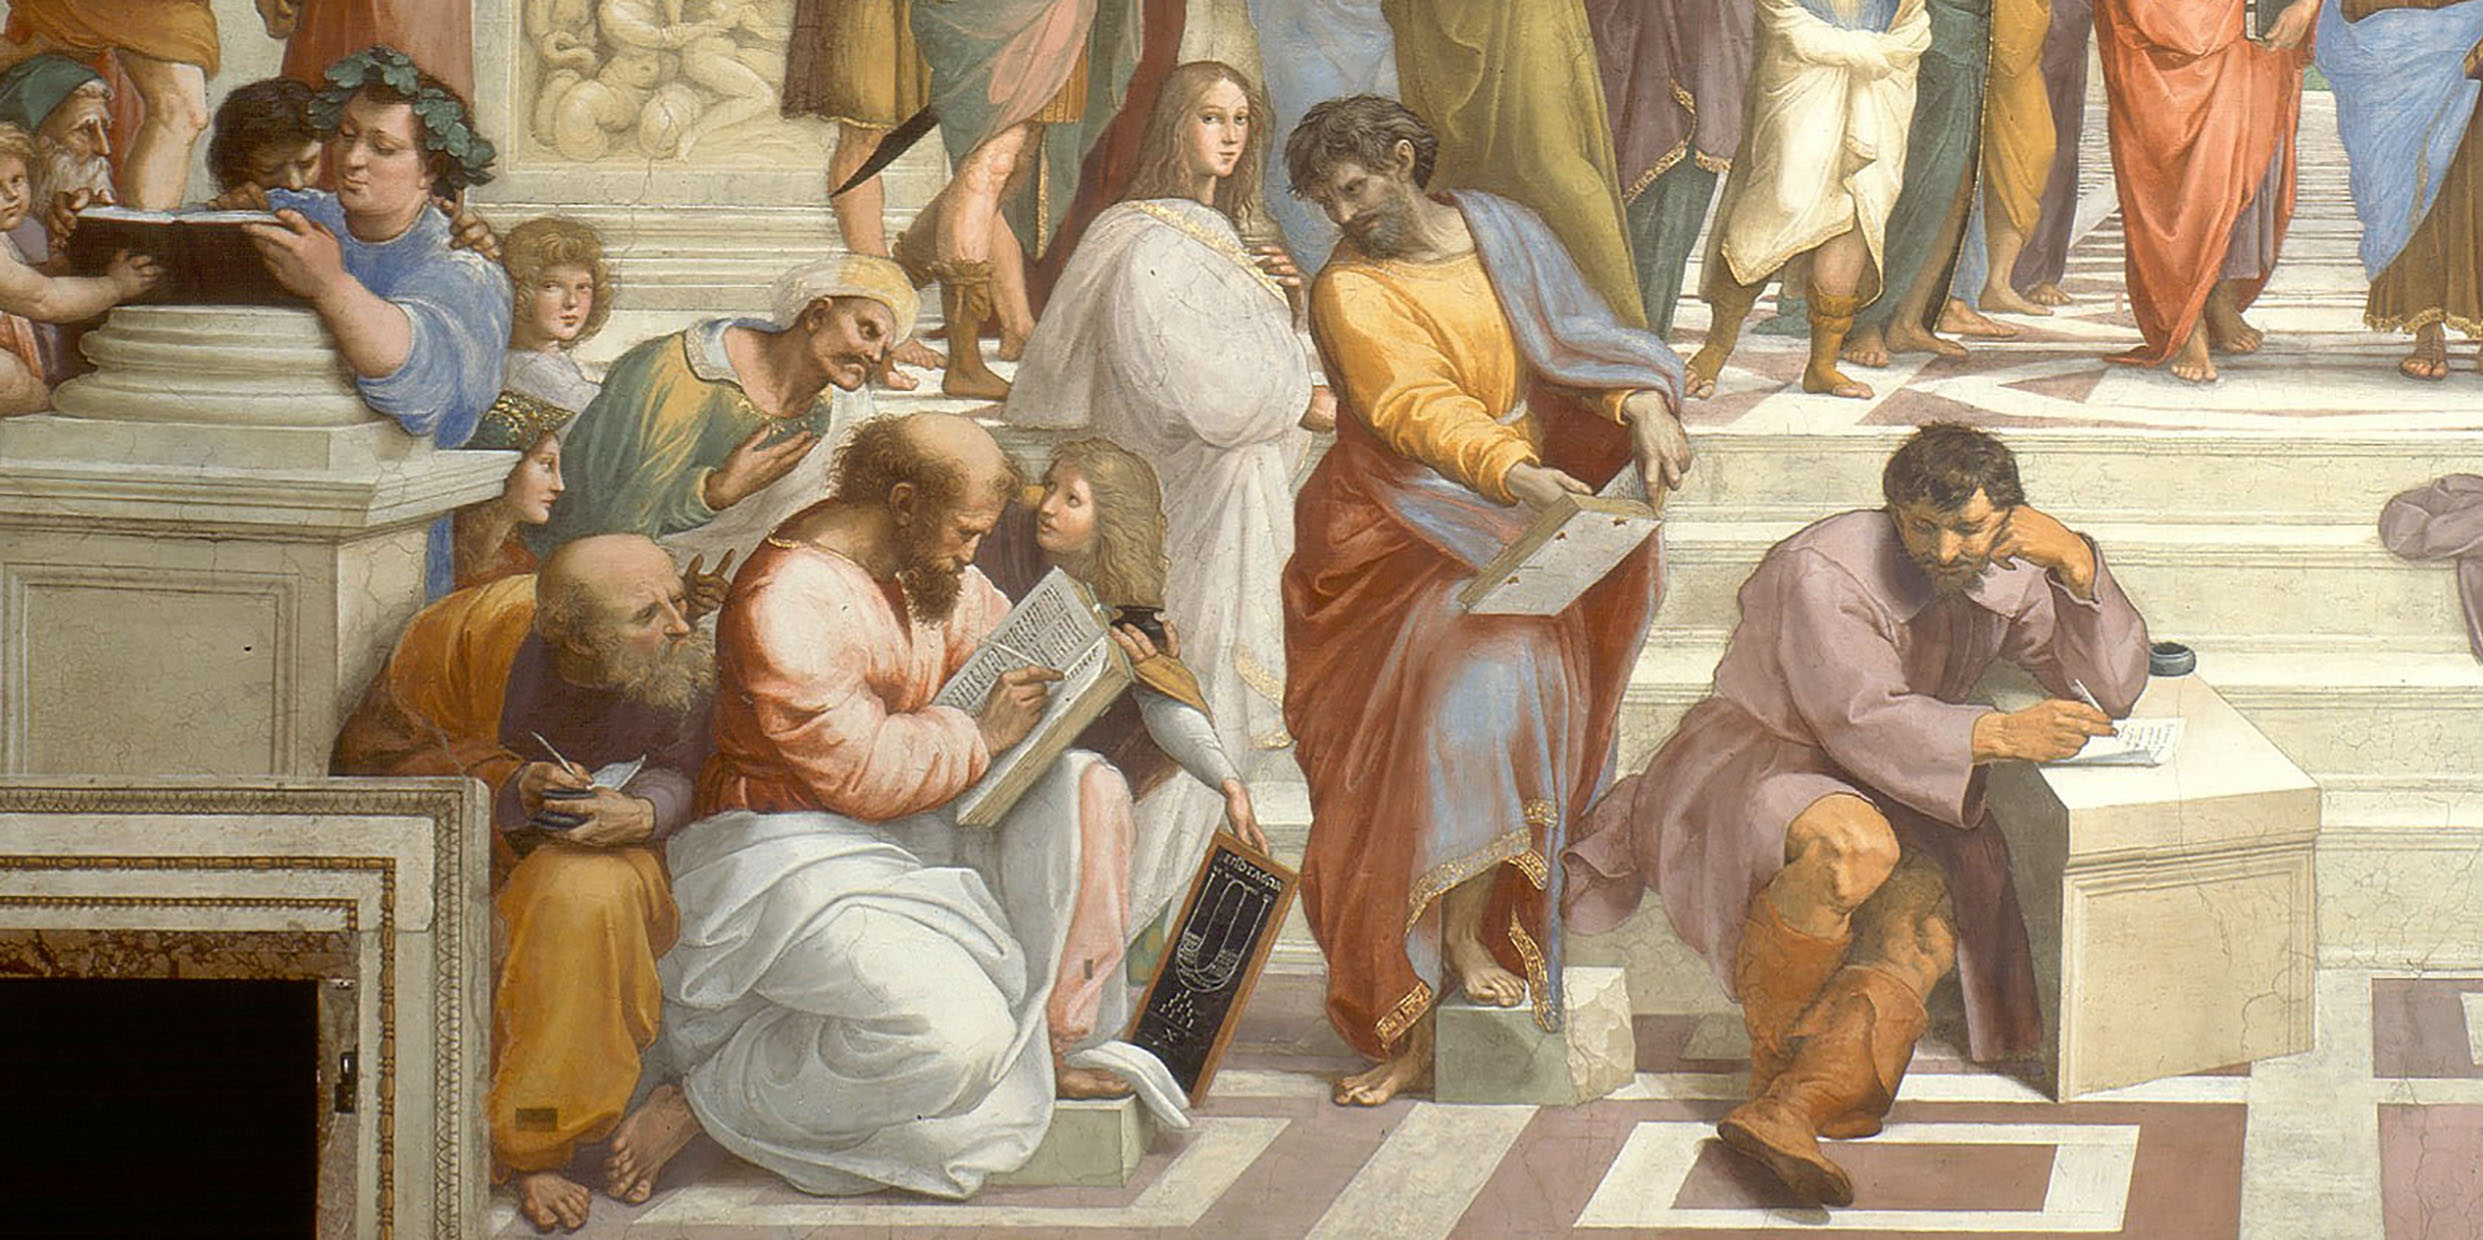 Image of The School of Athens